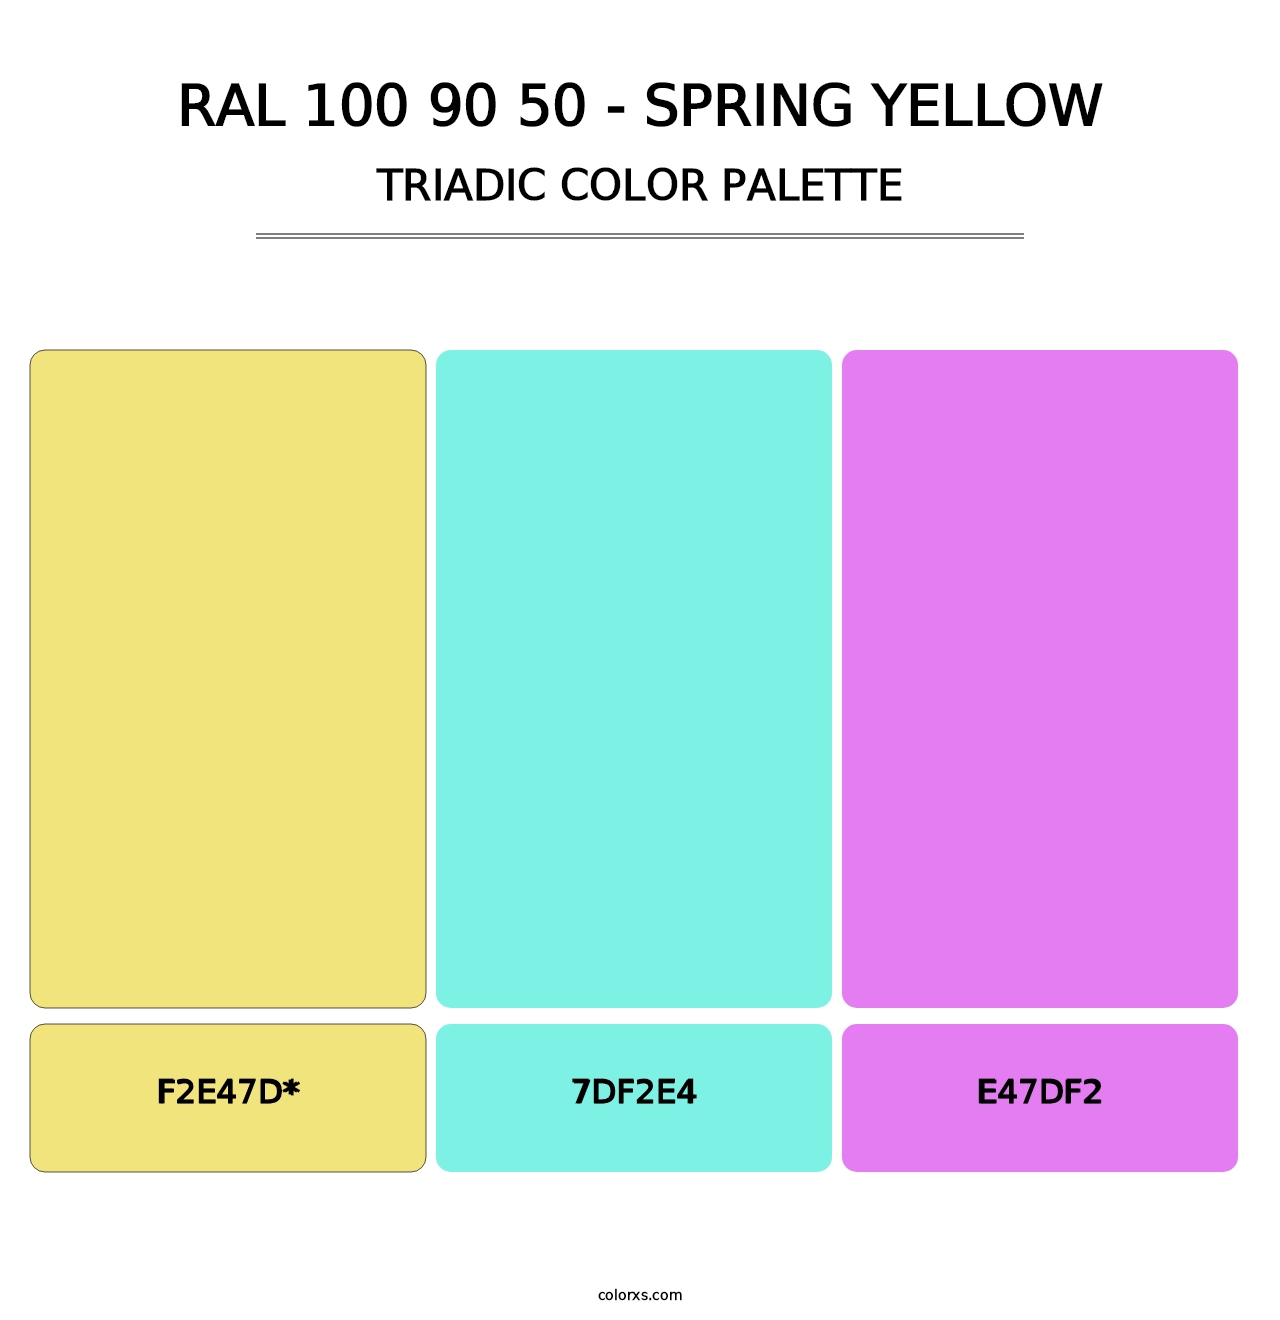 RAL 100 90 50 - Spring Yellow - Triadic Color Palette